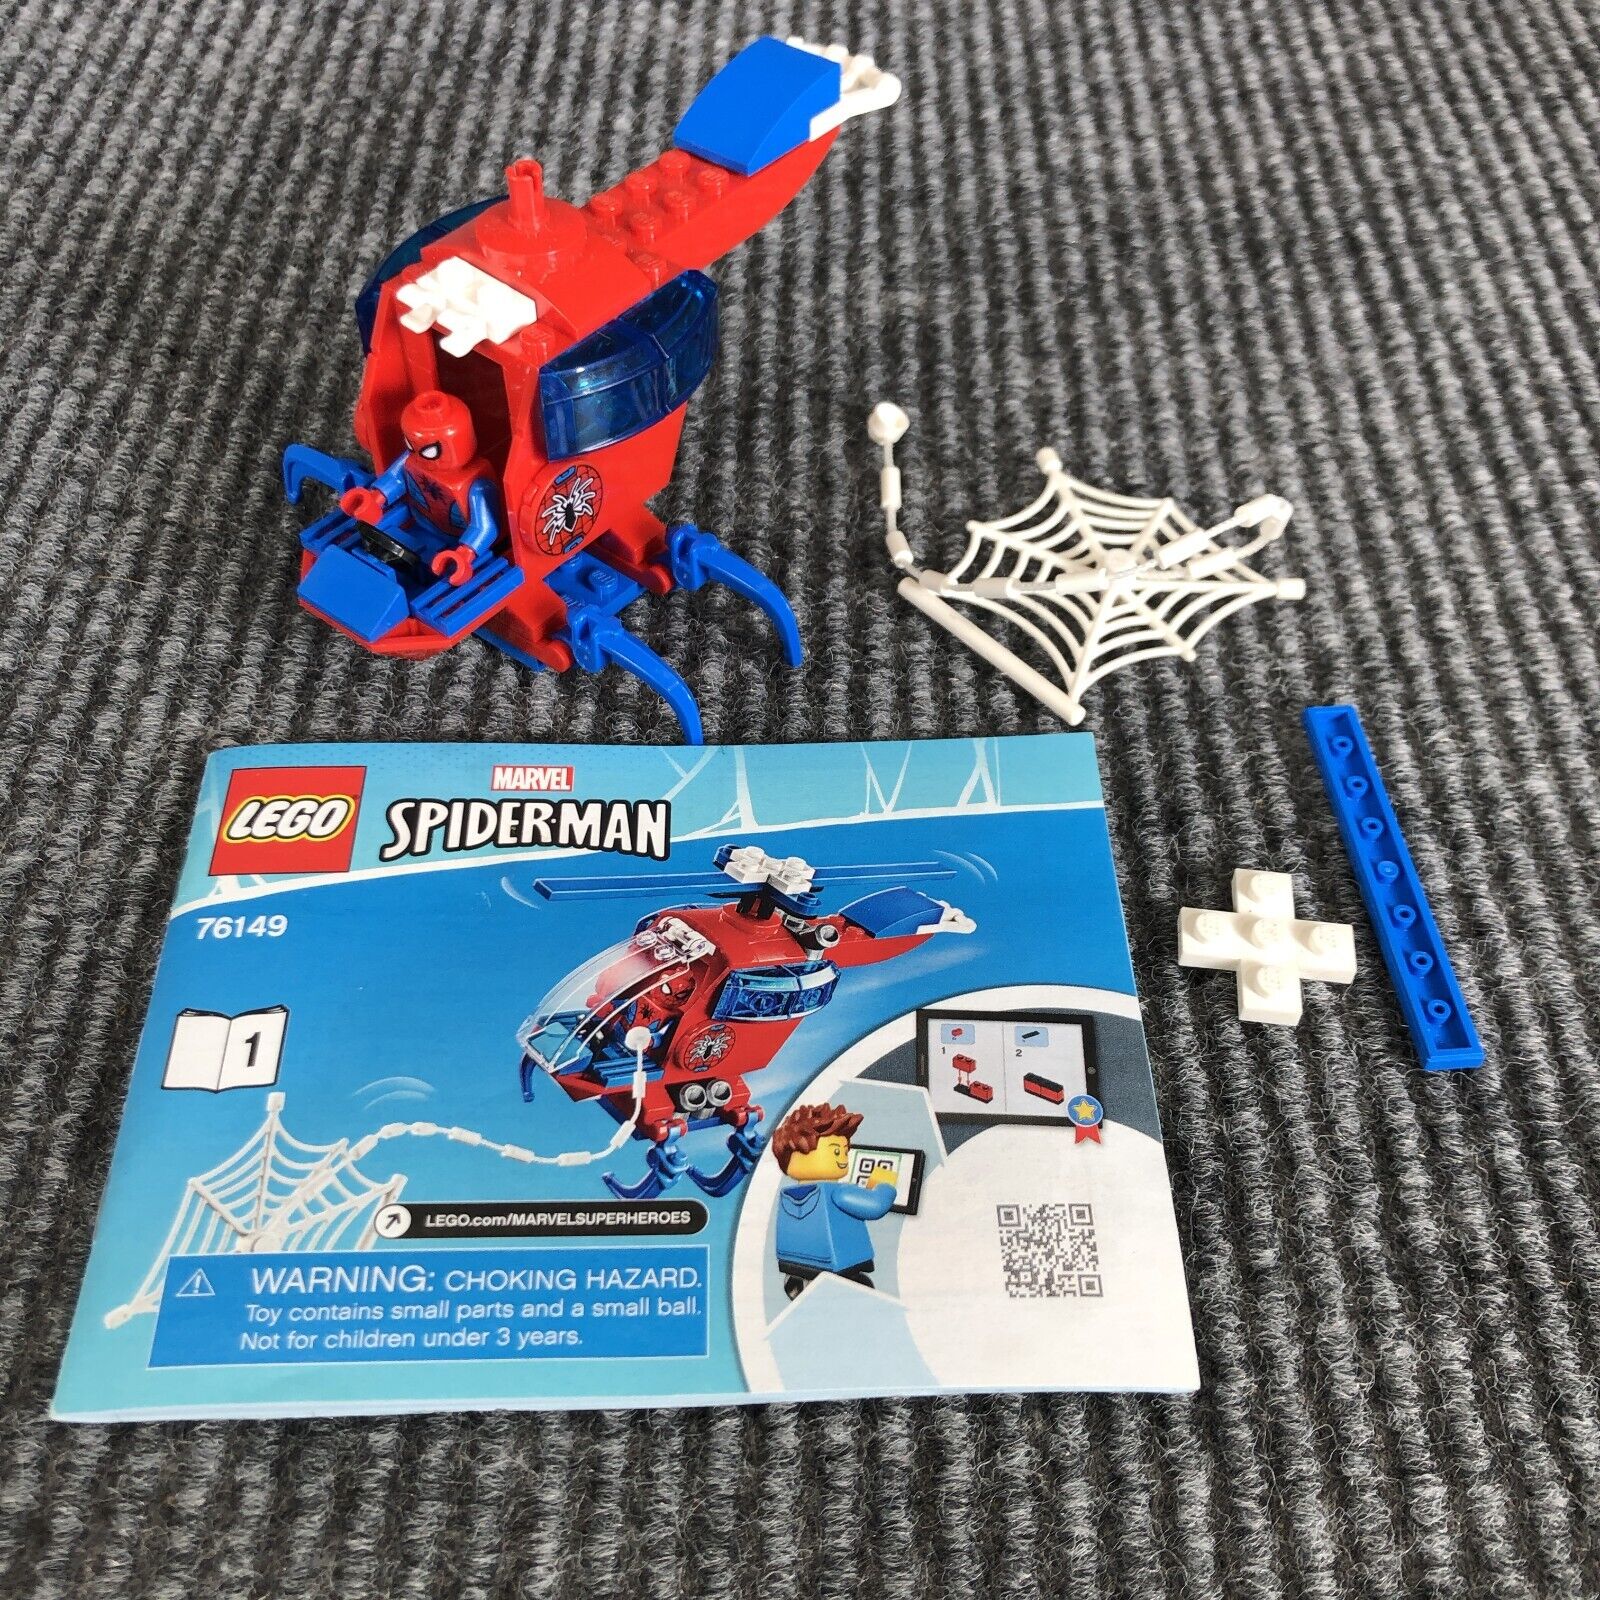 Lego 76149 Marvel SPIDER-MAN Incomplete Helicopter Minifig 30 Pieces Manual